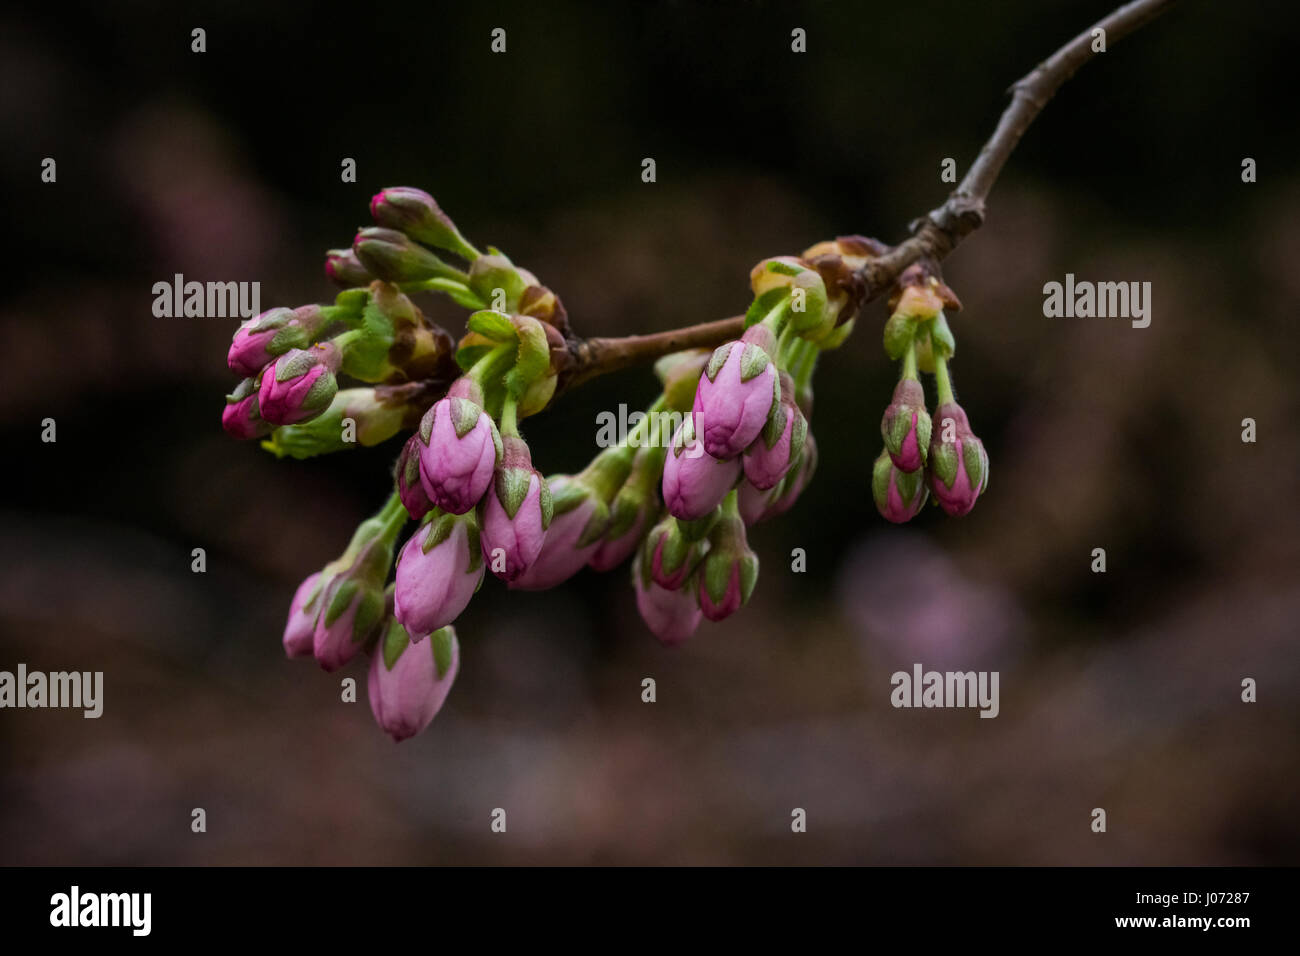 Pink Cherry tree branch witch closed buds. Stock Photo